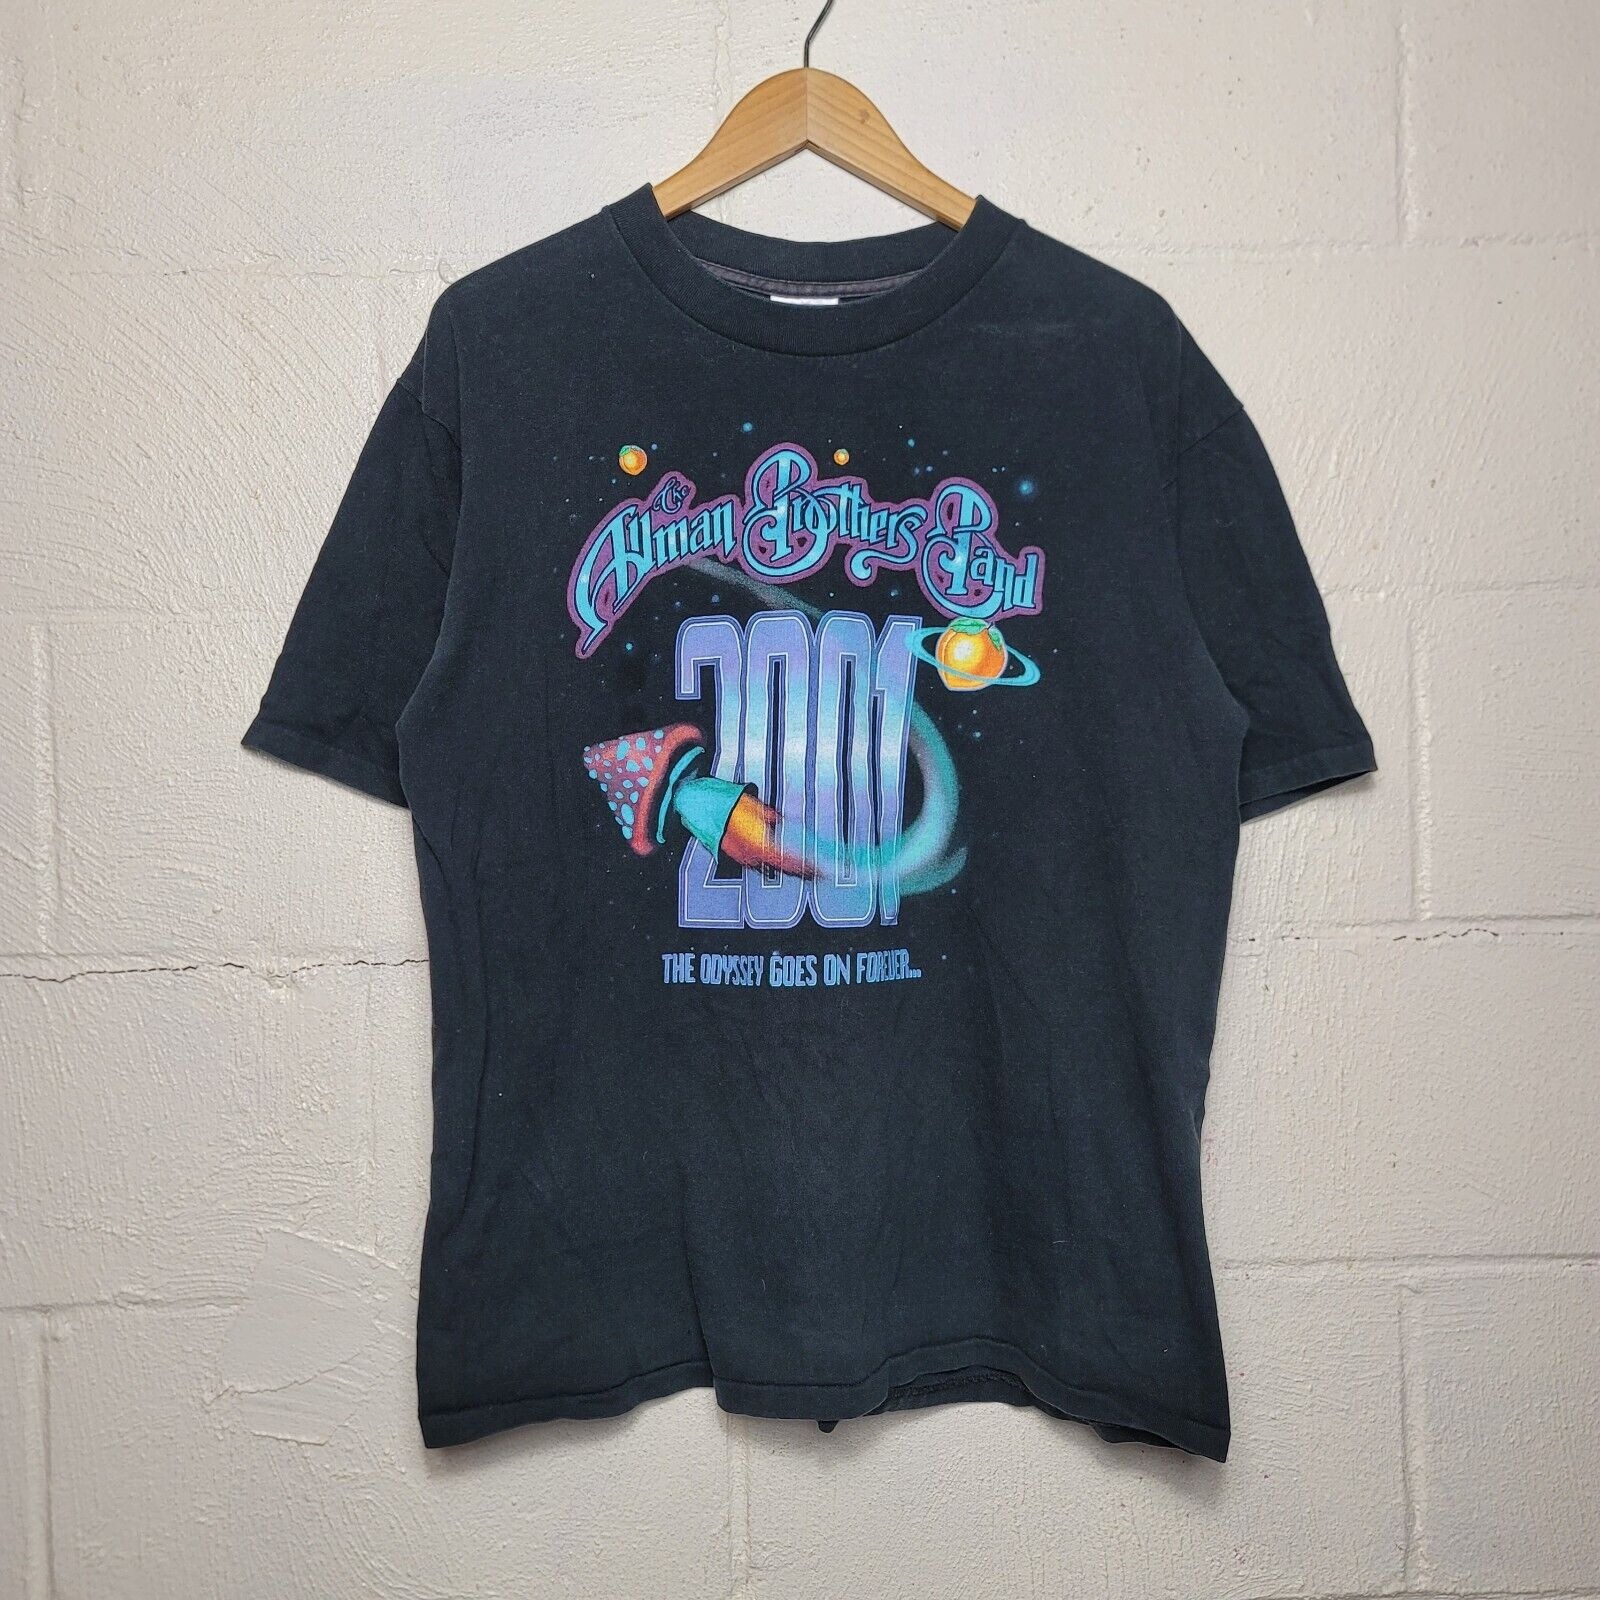 Vintage 2001 Allman Brothers Band The Odyssey Goes on Forever Tour Shirt